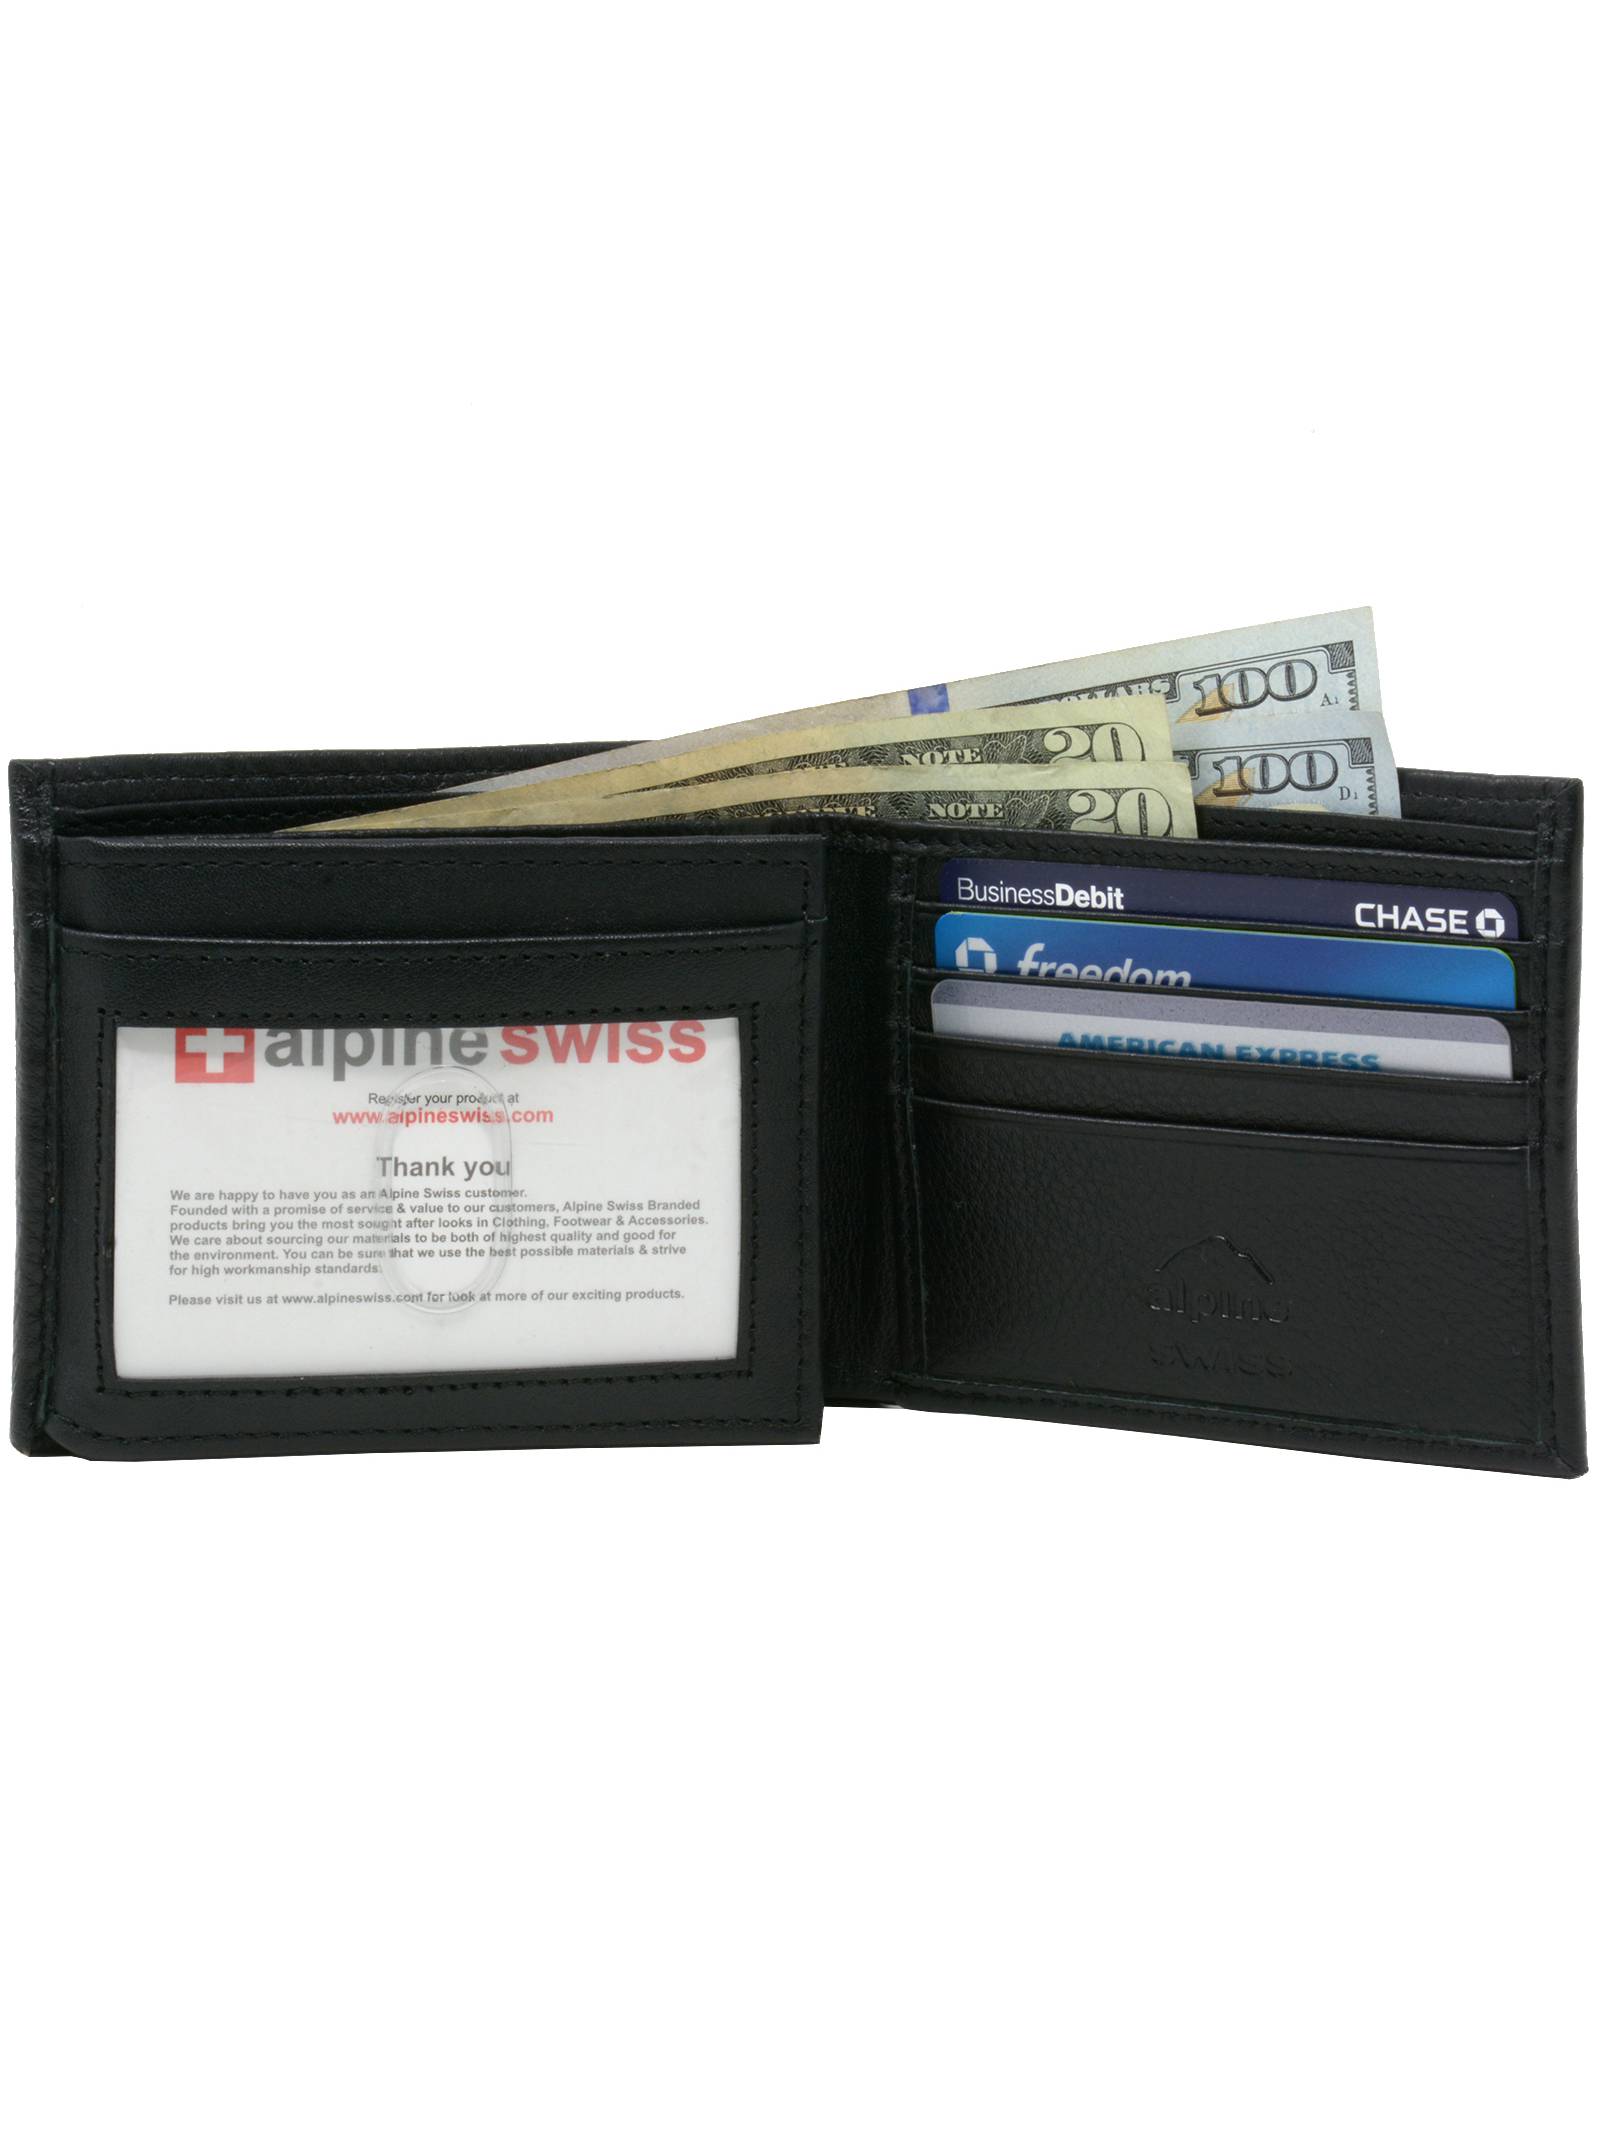 Alpine Swiss Mens Wallet Real Leather Flipout Hybrid Bifold Trifold ID Card Case - image 4 of 7